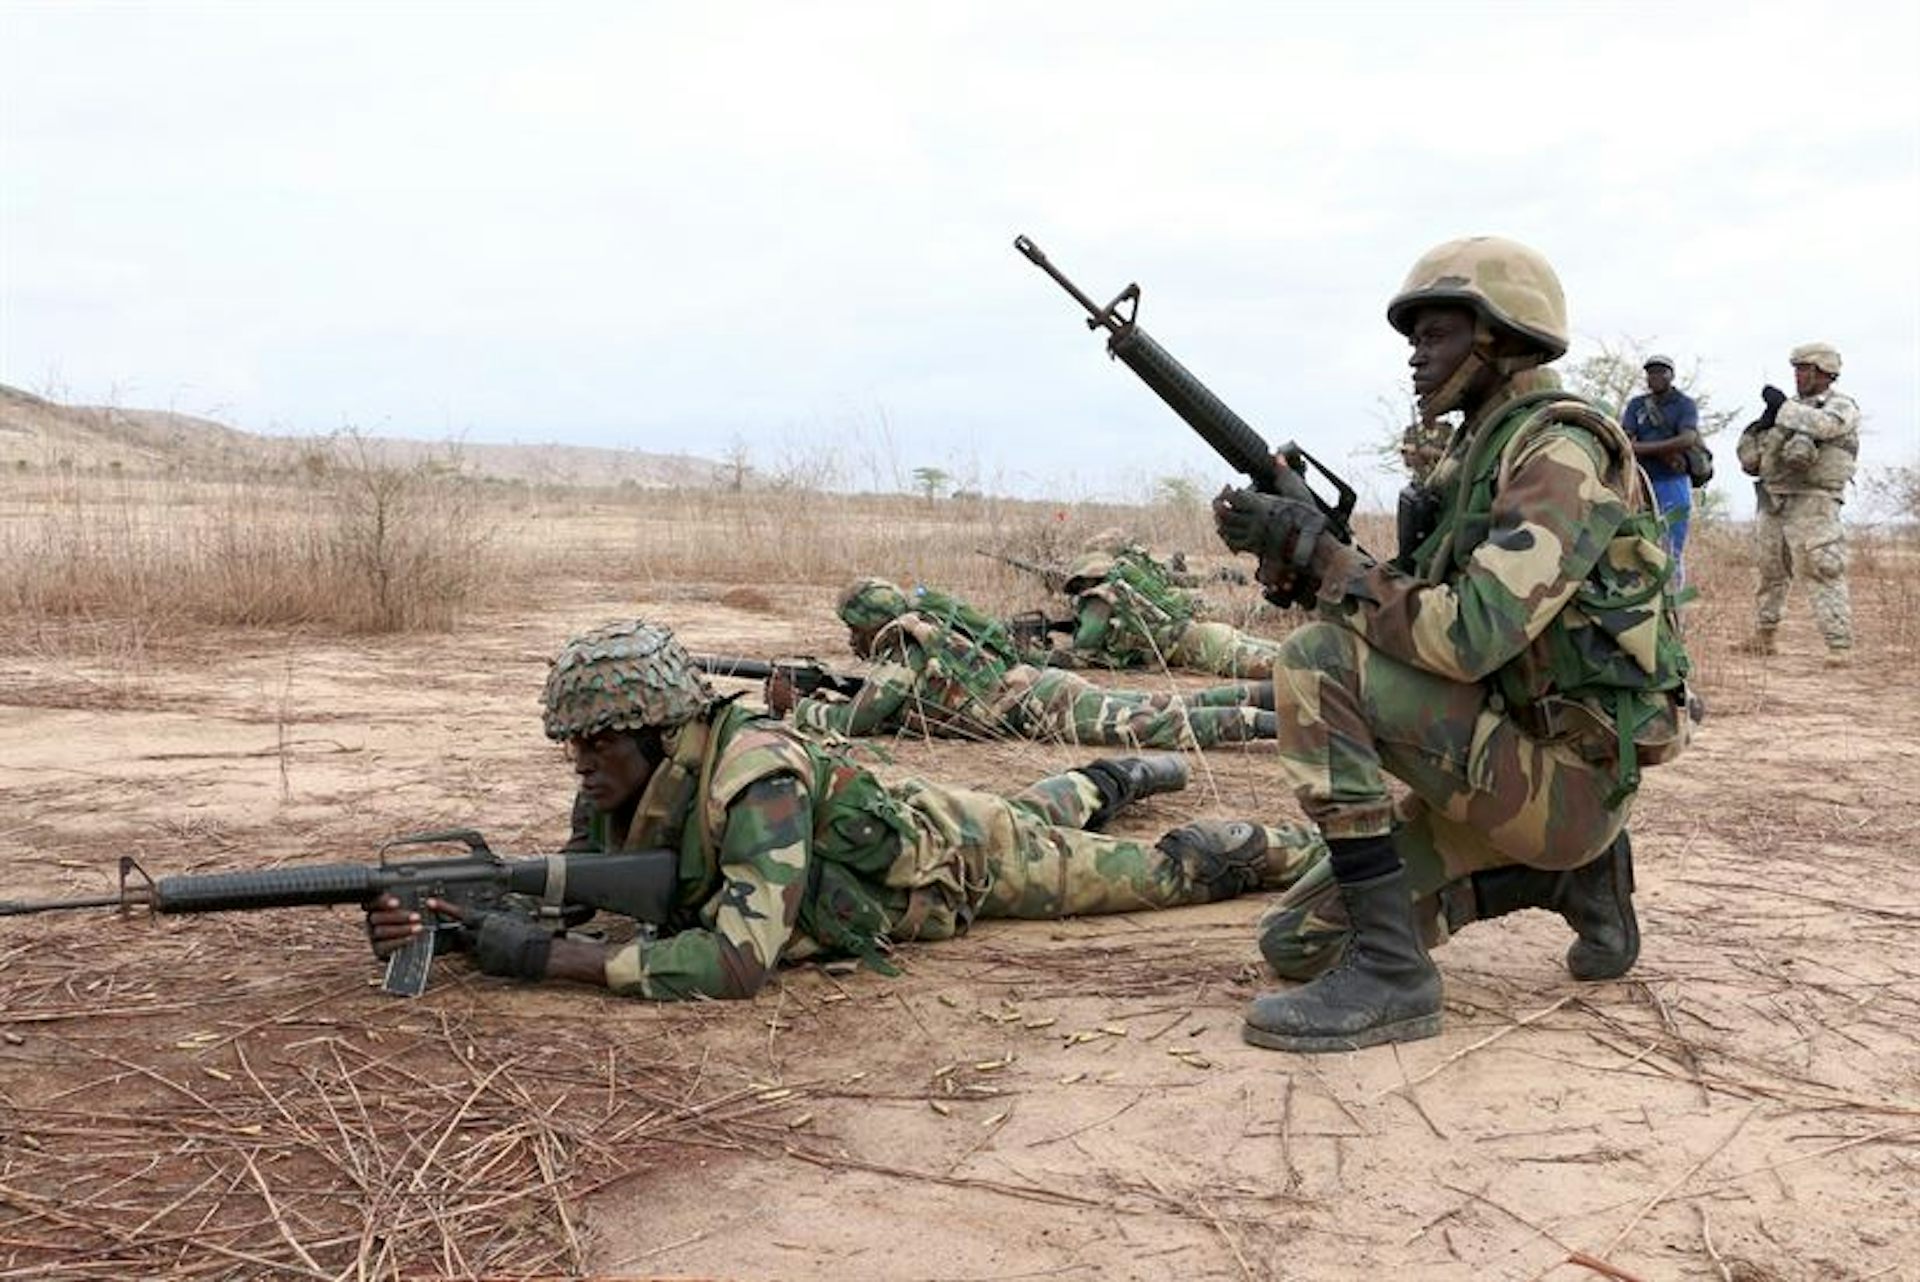 Dialogue Does Not Mean Defeat: Rethinking Africa’s Stance on Counter-Terrorism